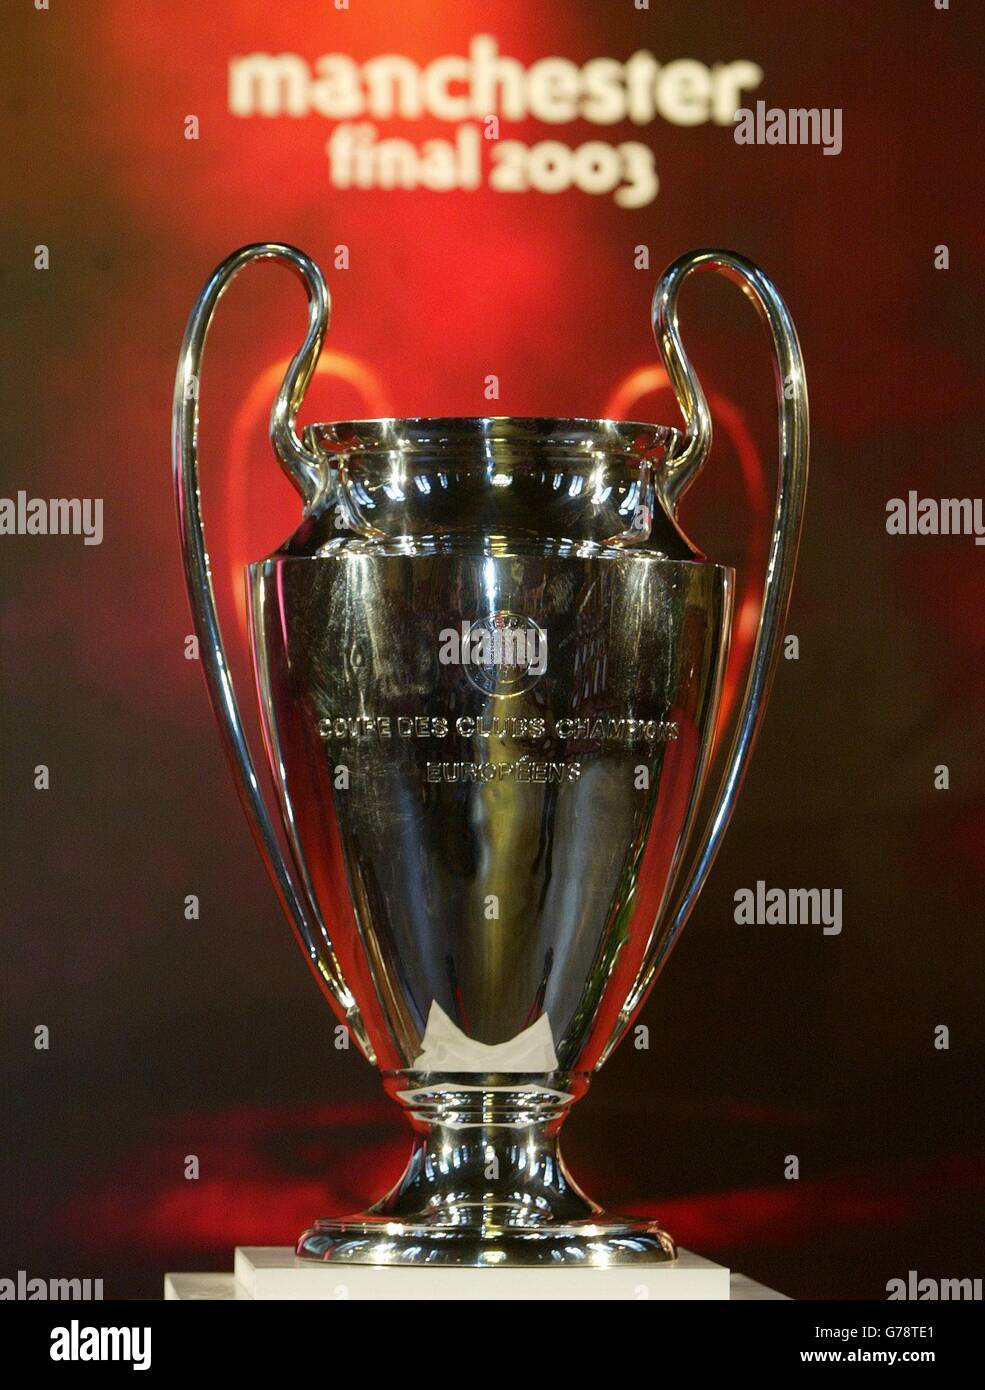 The Champions league trophy arrives in Manchester, as the city prepares to  host the Champions League final at Old Trafford in May Stock Photo - Alamy